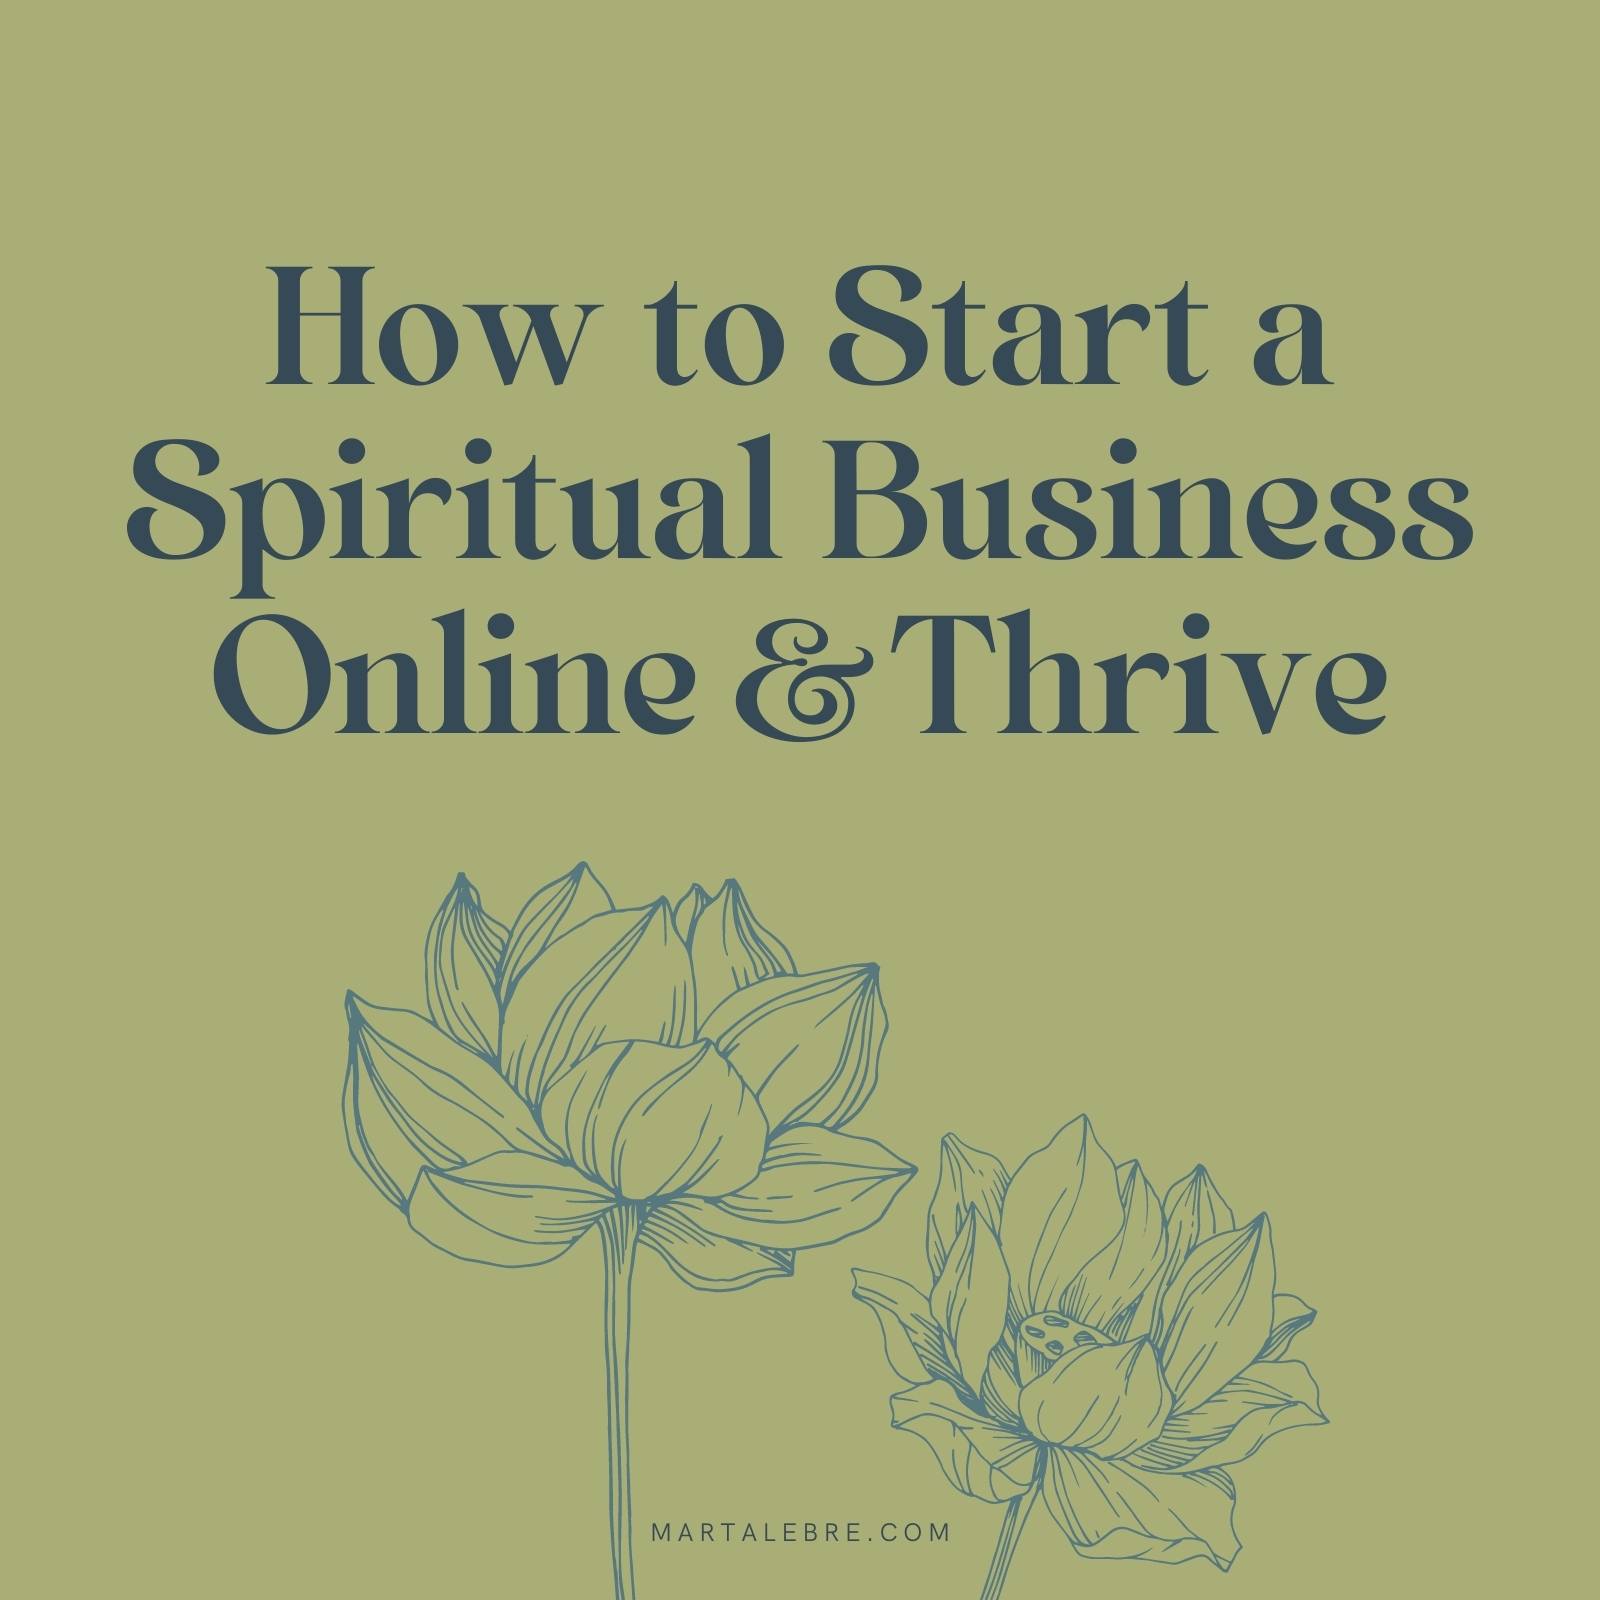 How to Start a Spiritual Business Online in 2023